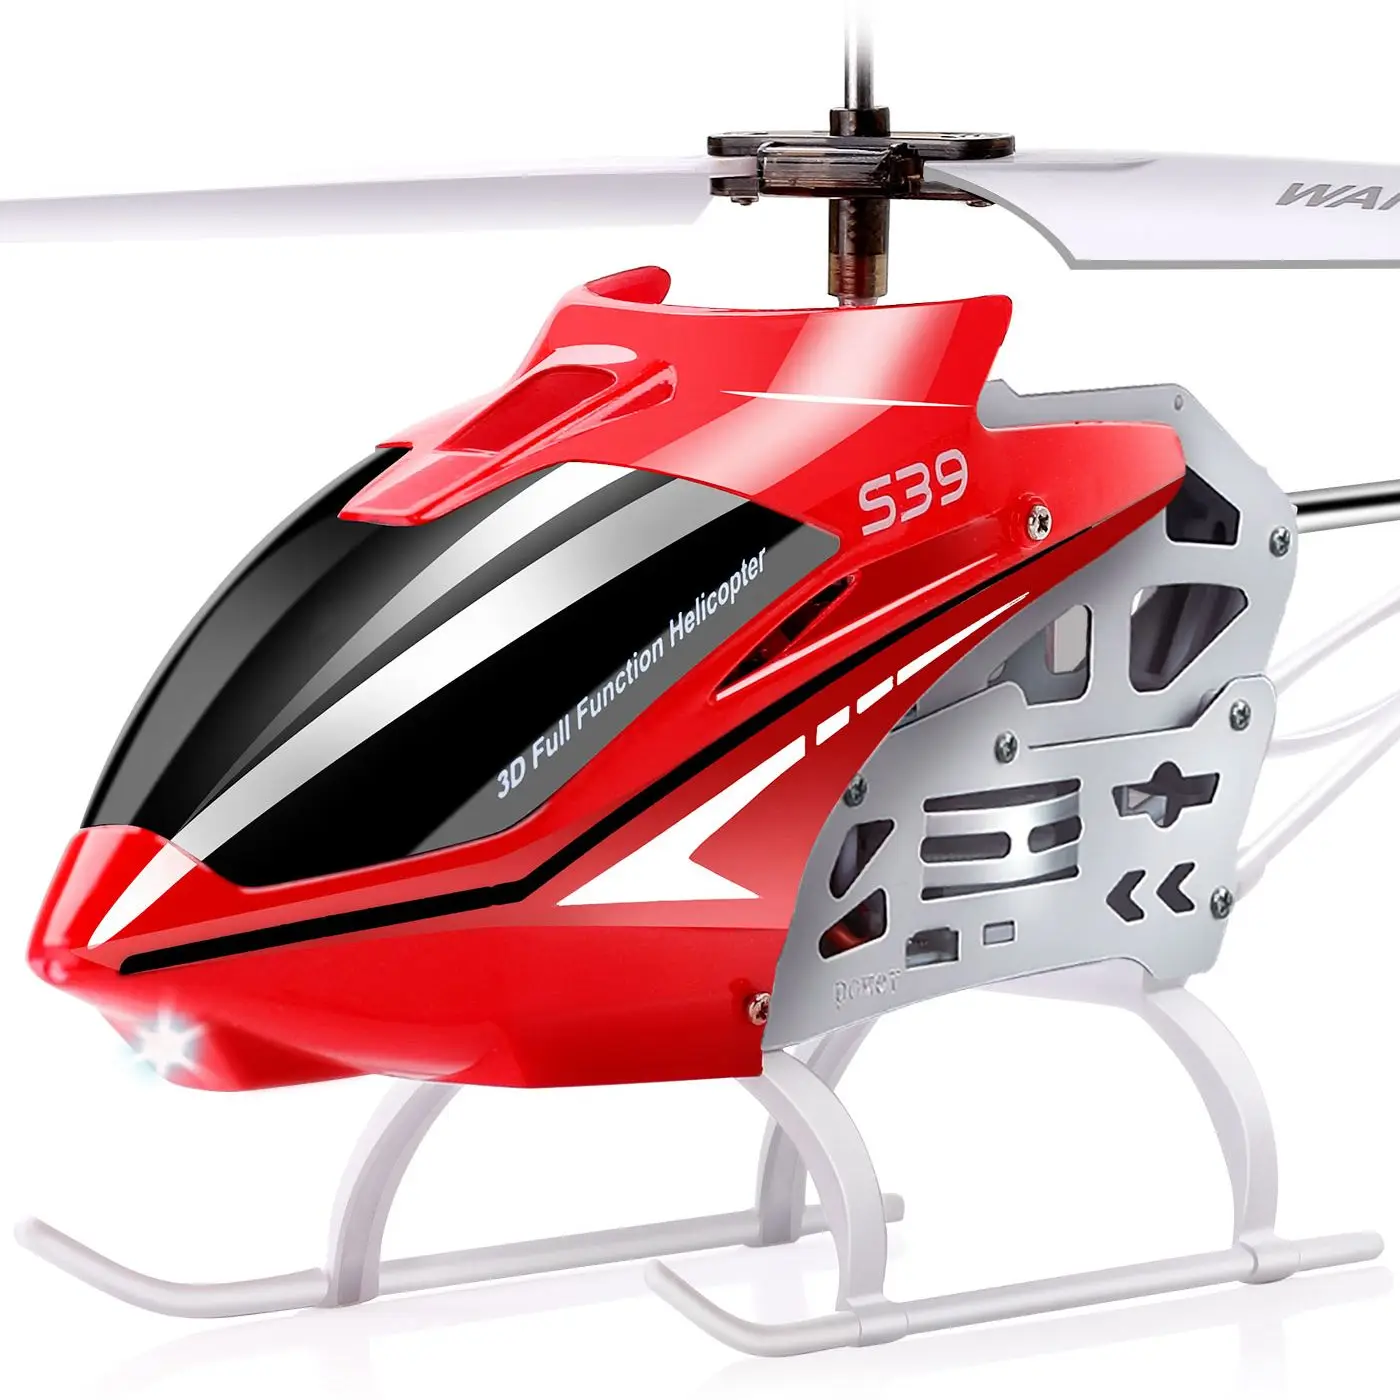 SYMA RC Helicopter S39 Aircraft with 3.5 Channel Bigger Size Sturdy Alloy Material Gyro Stabilizer and High&Low Speed Drone enlarge